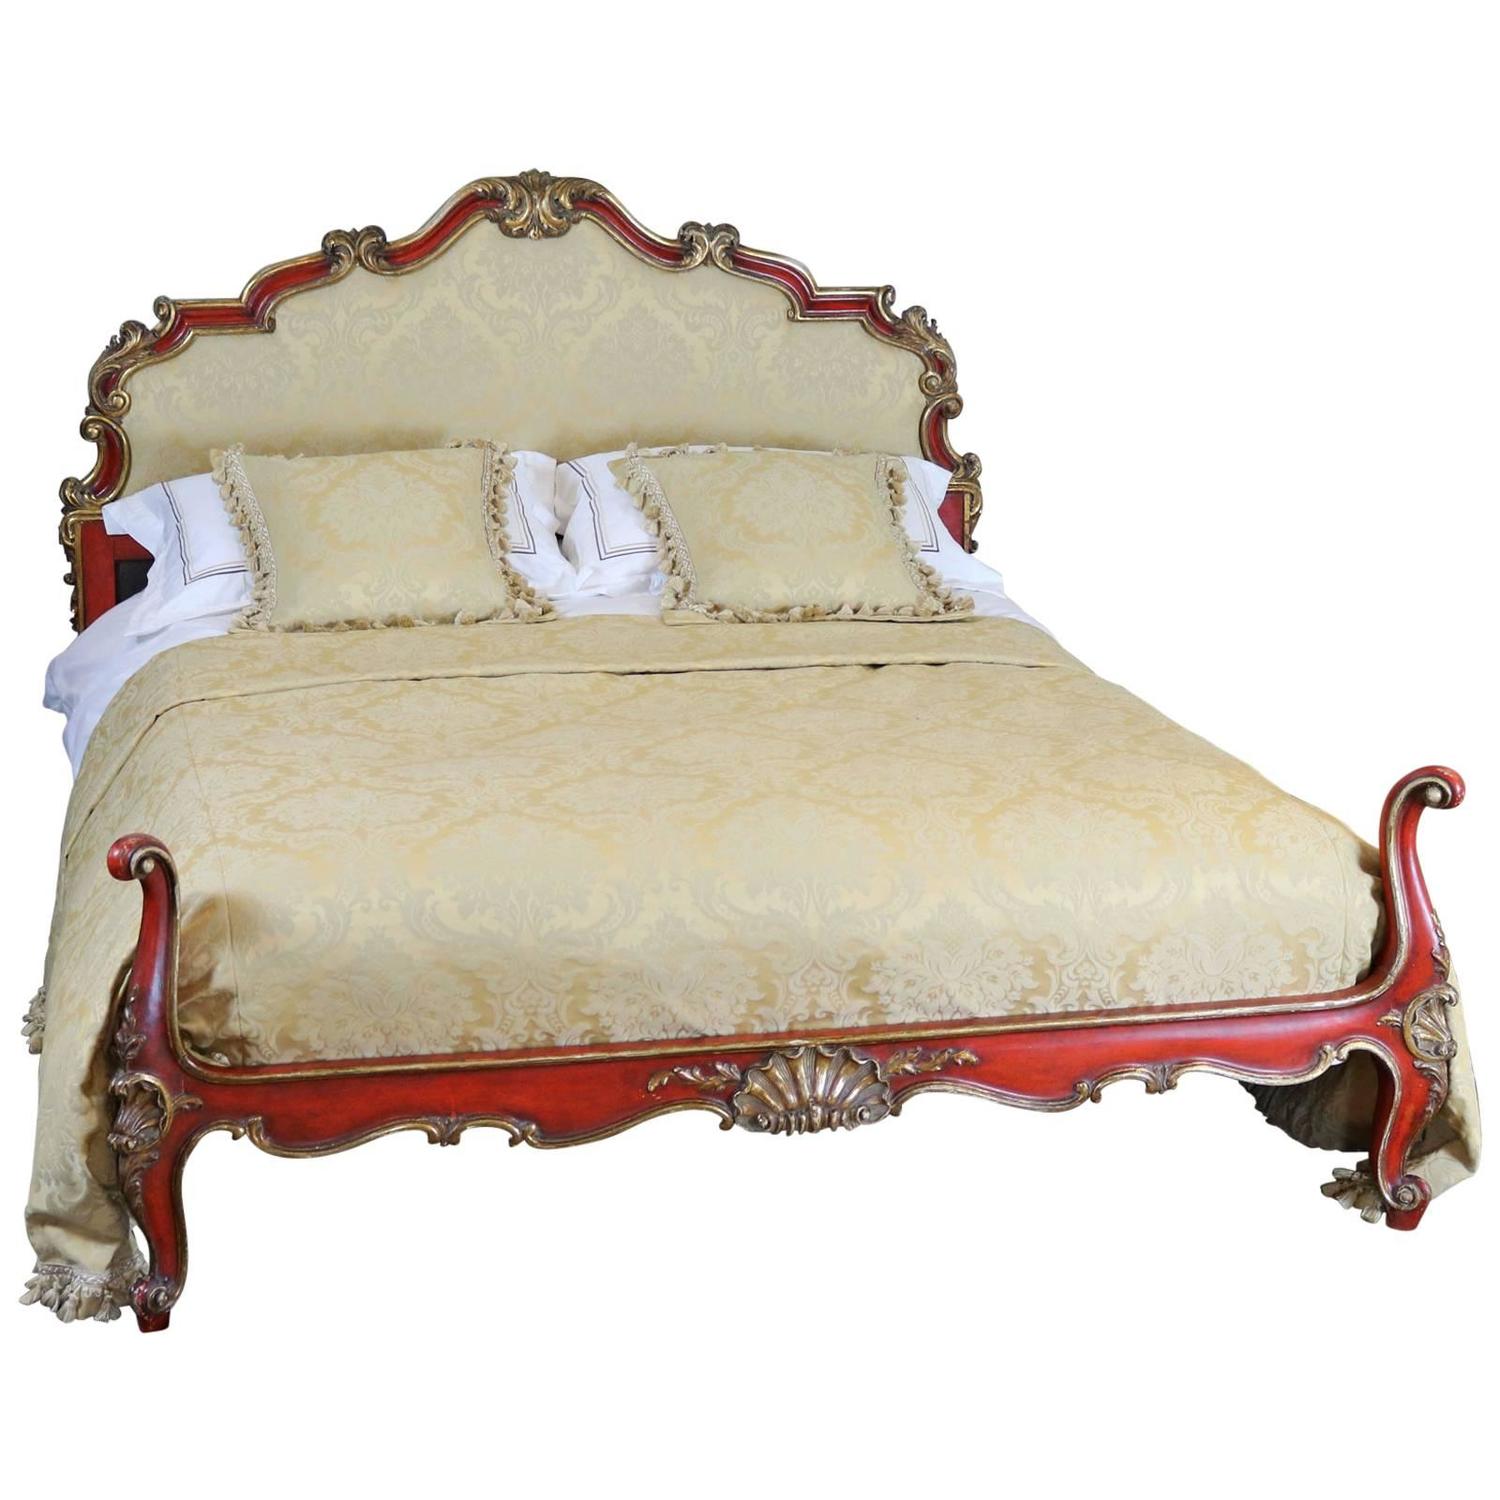 Italian Rococo Upholstered Bed at 1stdibs